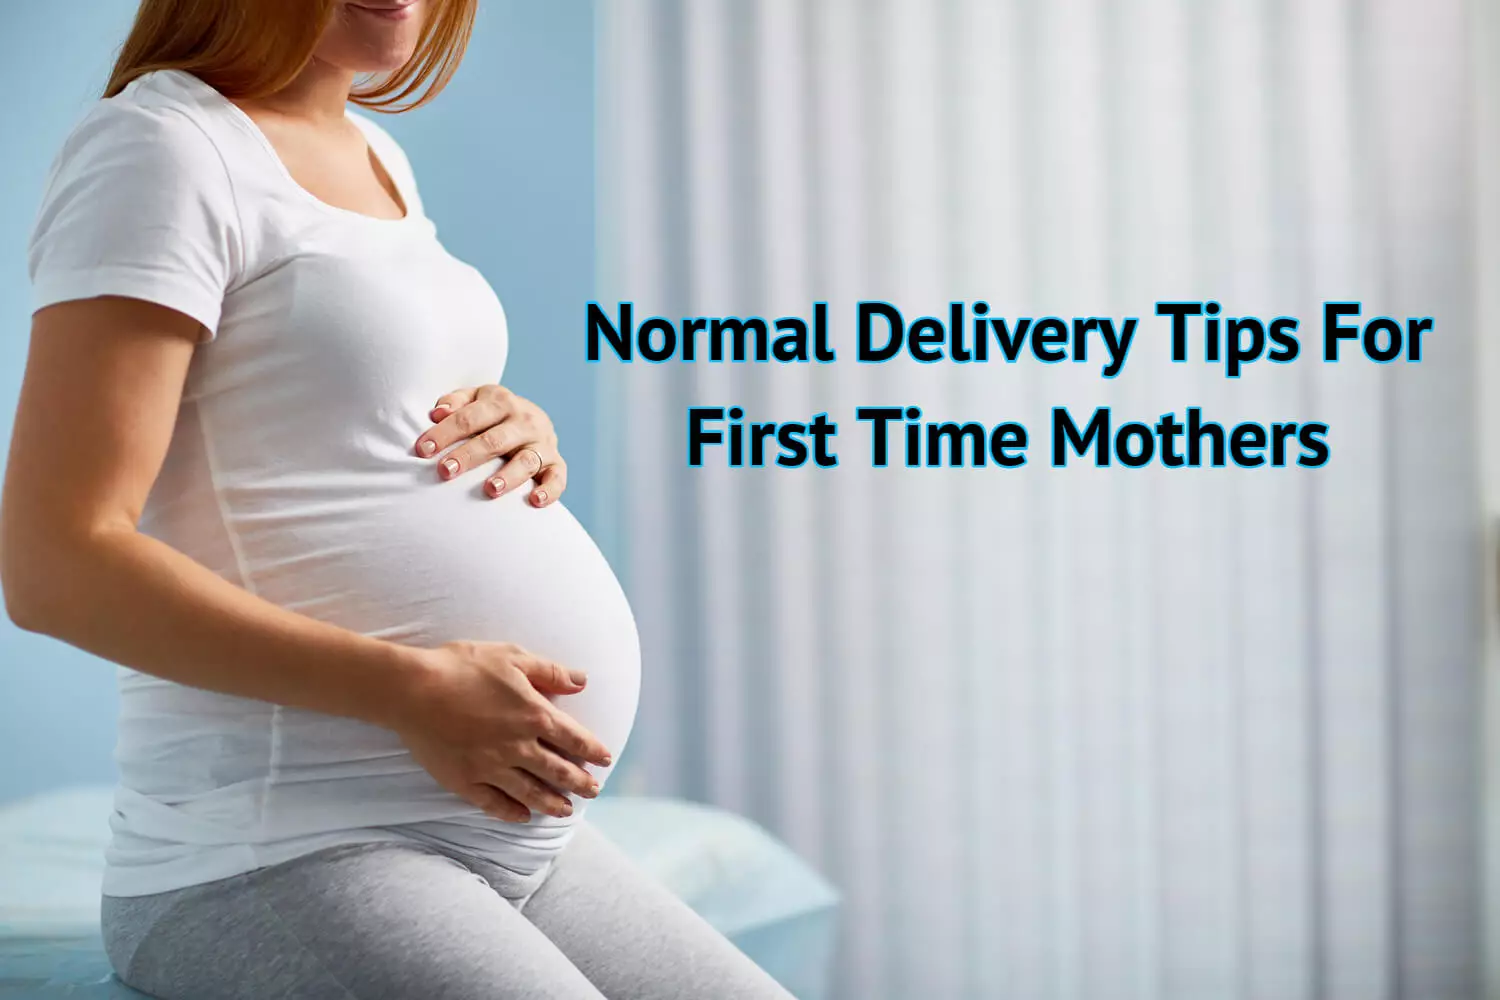 Normal delivery tips for first-time mothers.